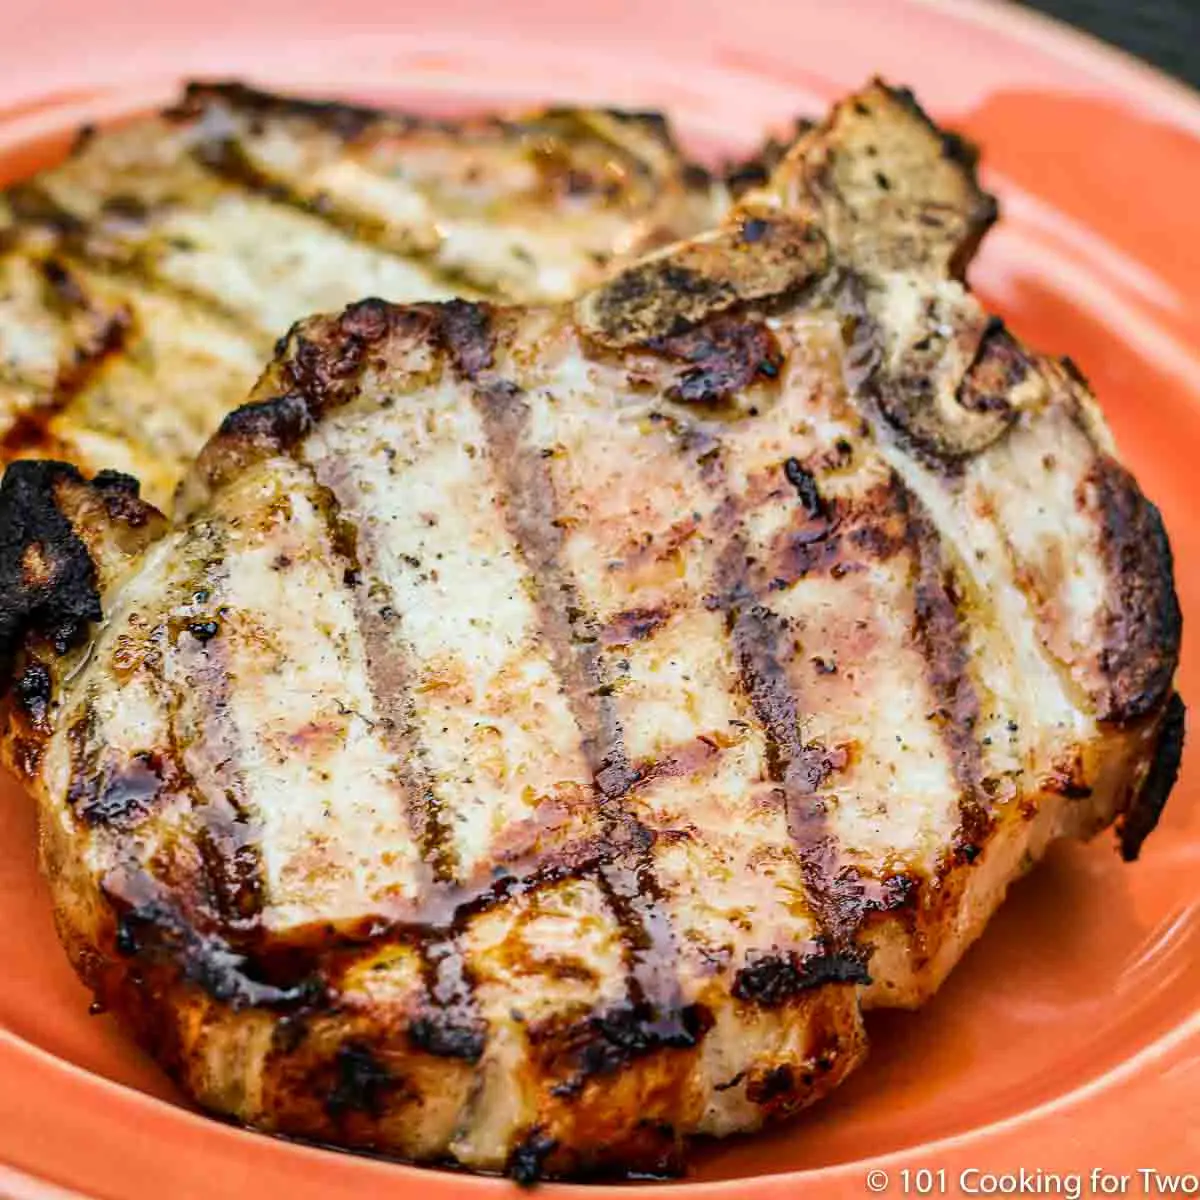 How long to cook pork chops on gas grill